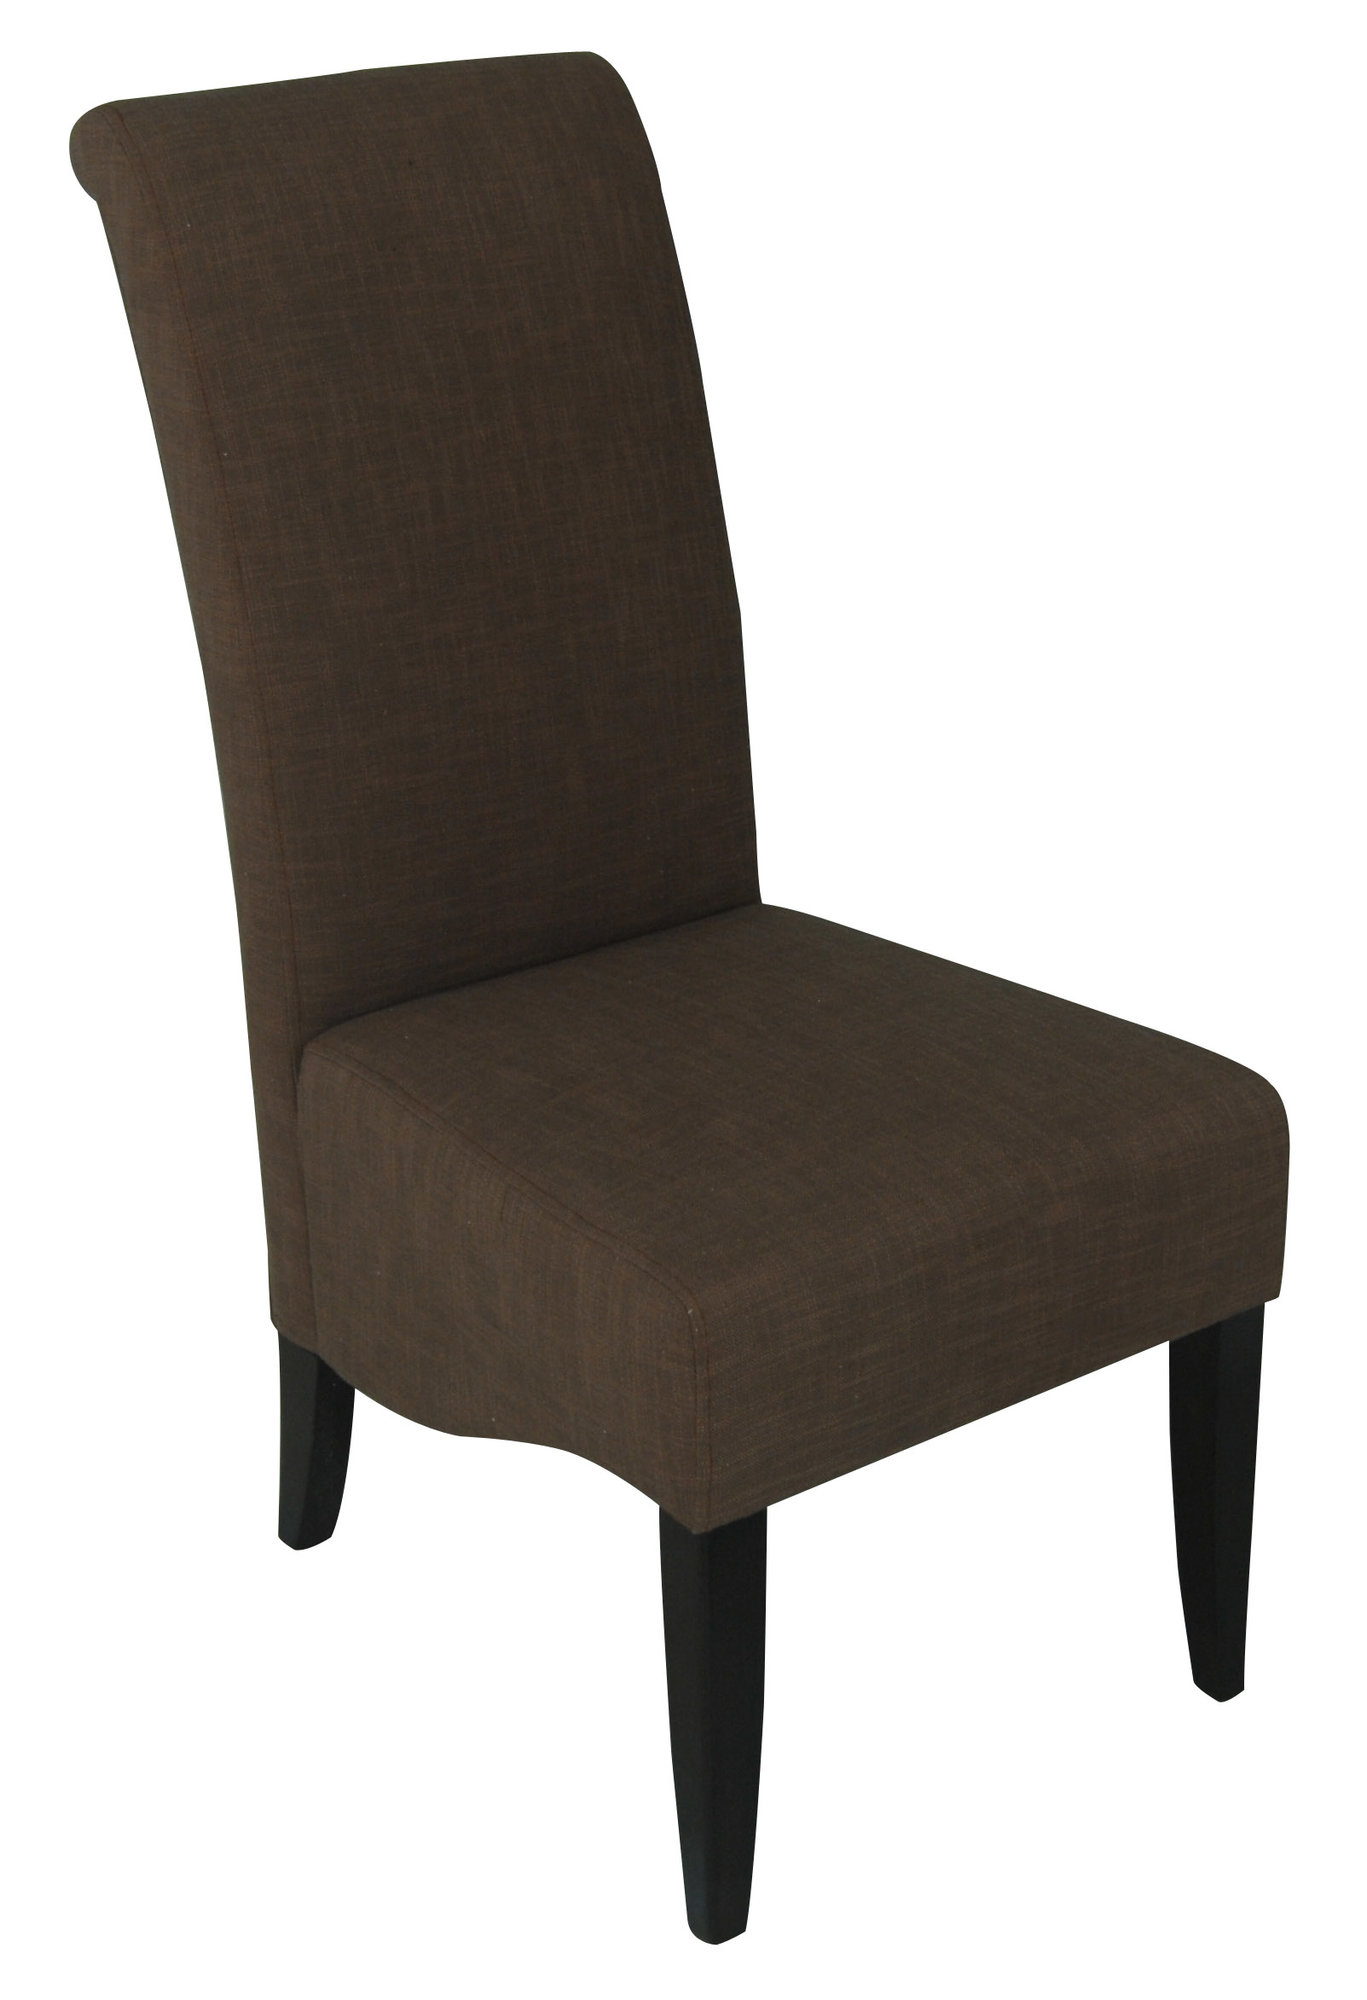 Carolina Accents Cameron Cocoa Dining Chairs (Set of 2) by